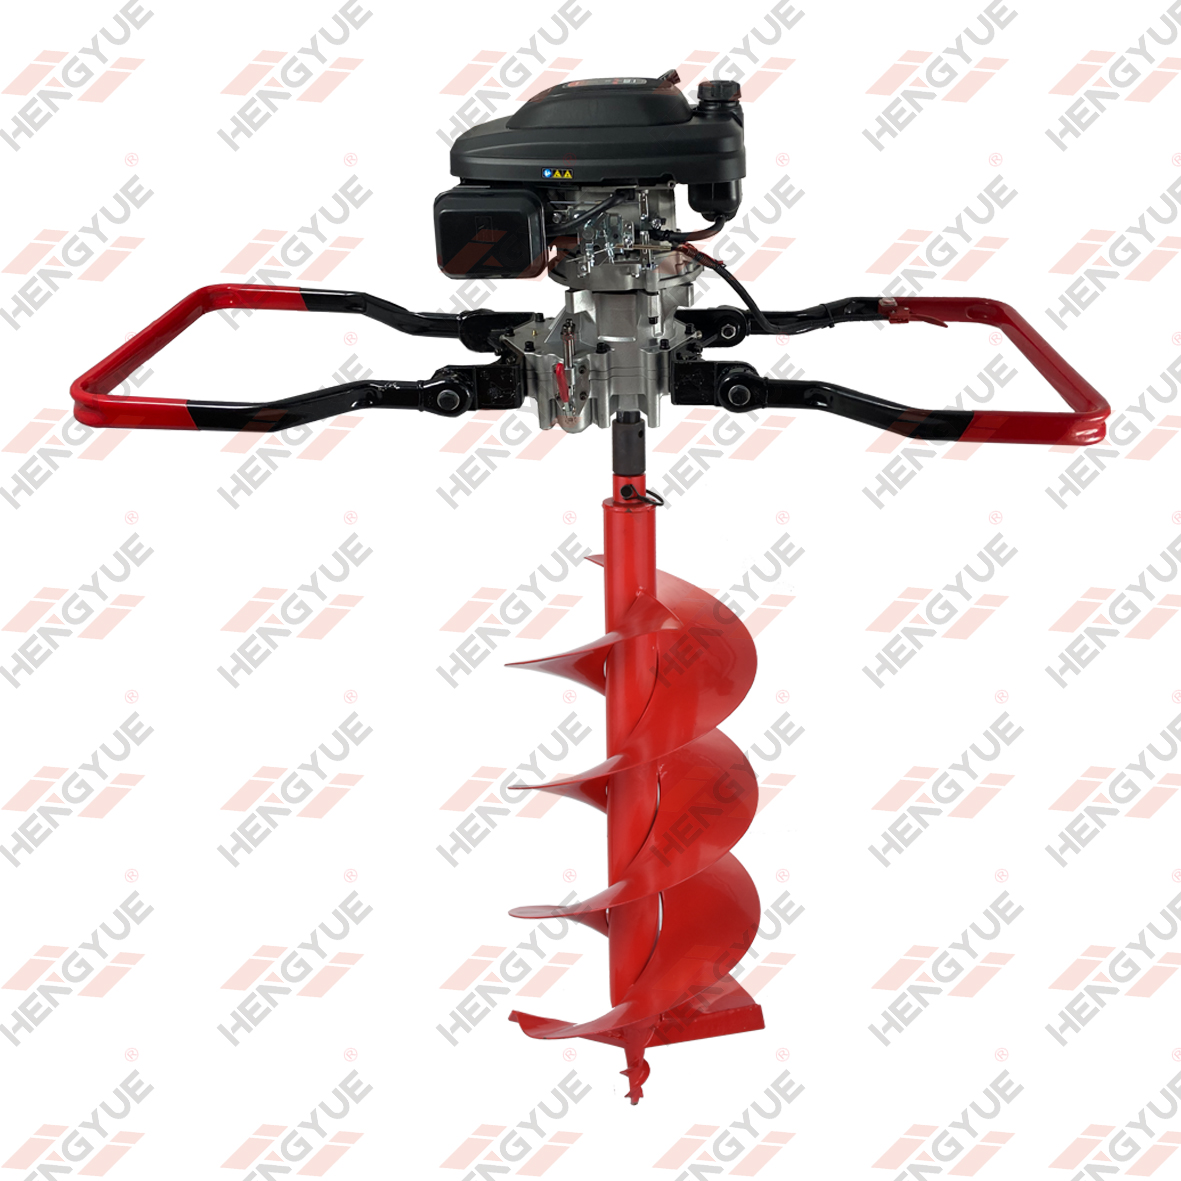 Reverse Function 4 Stroke Engine Power Earth Auger Machine 